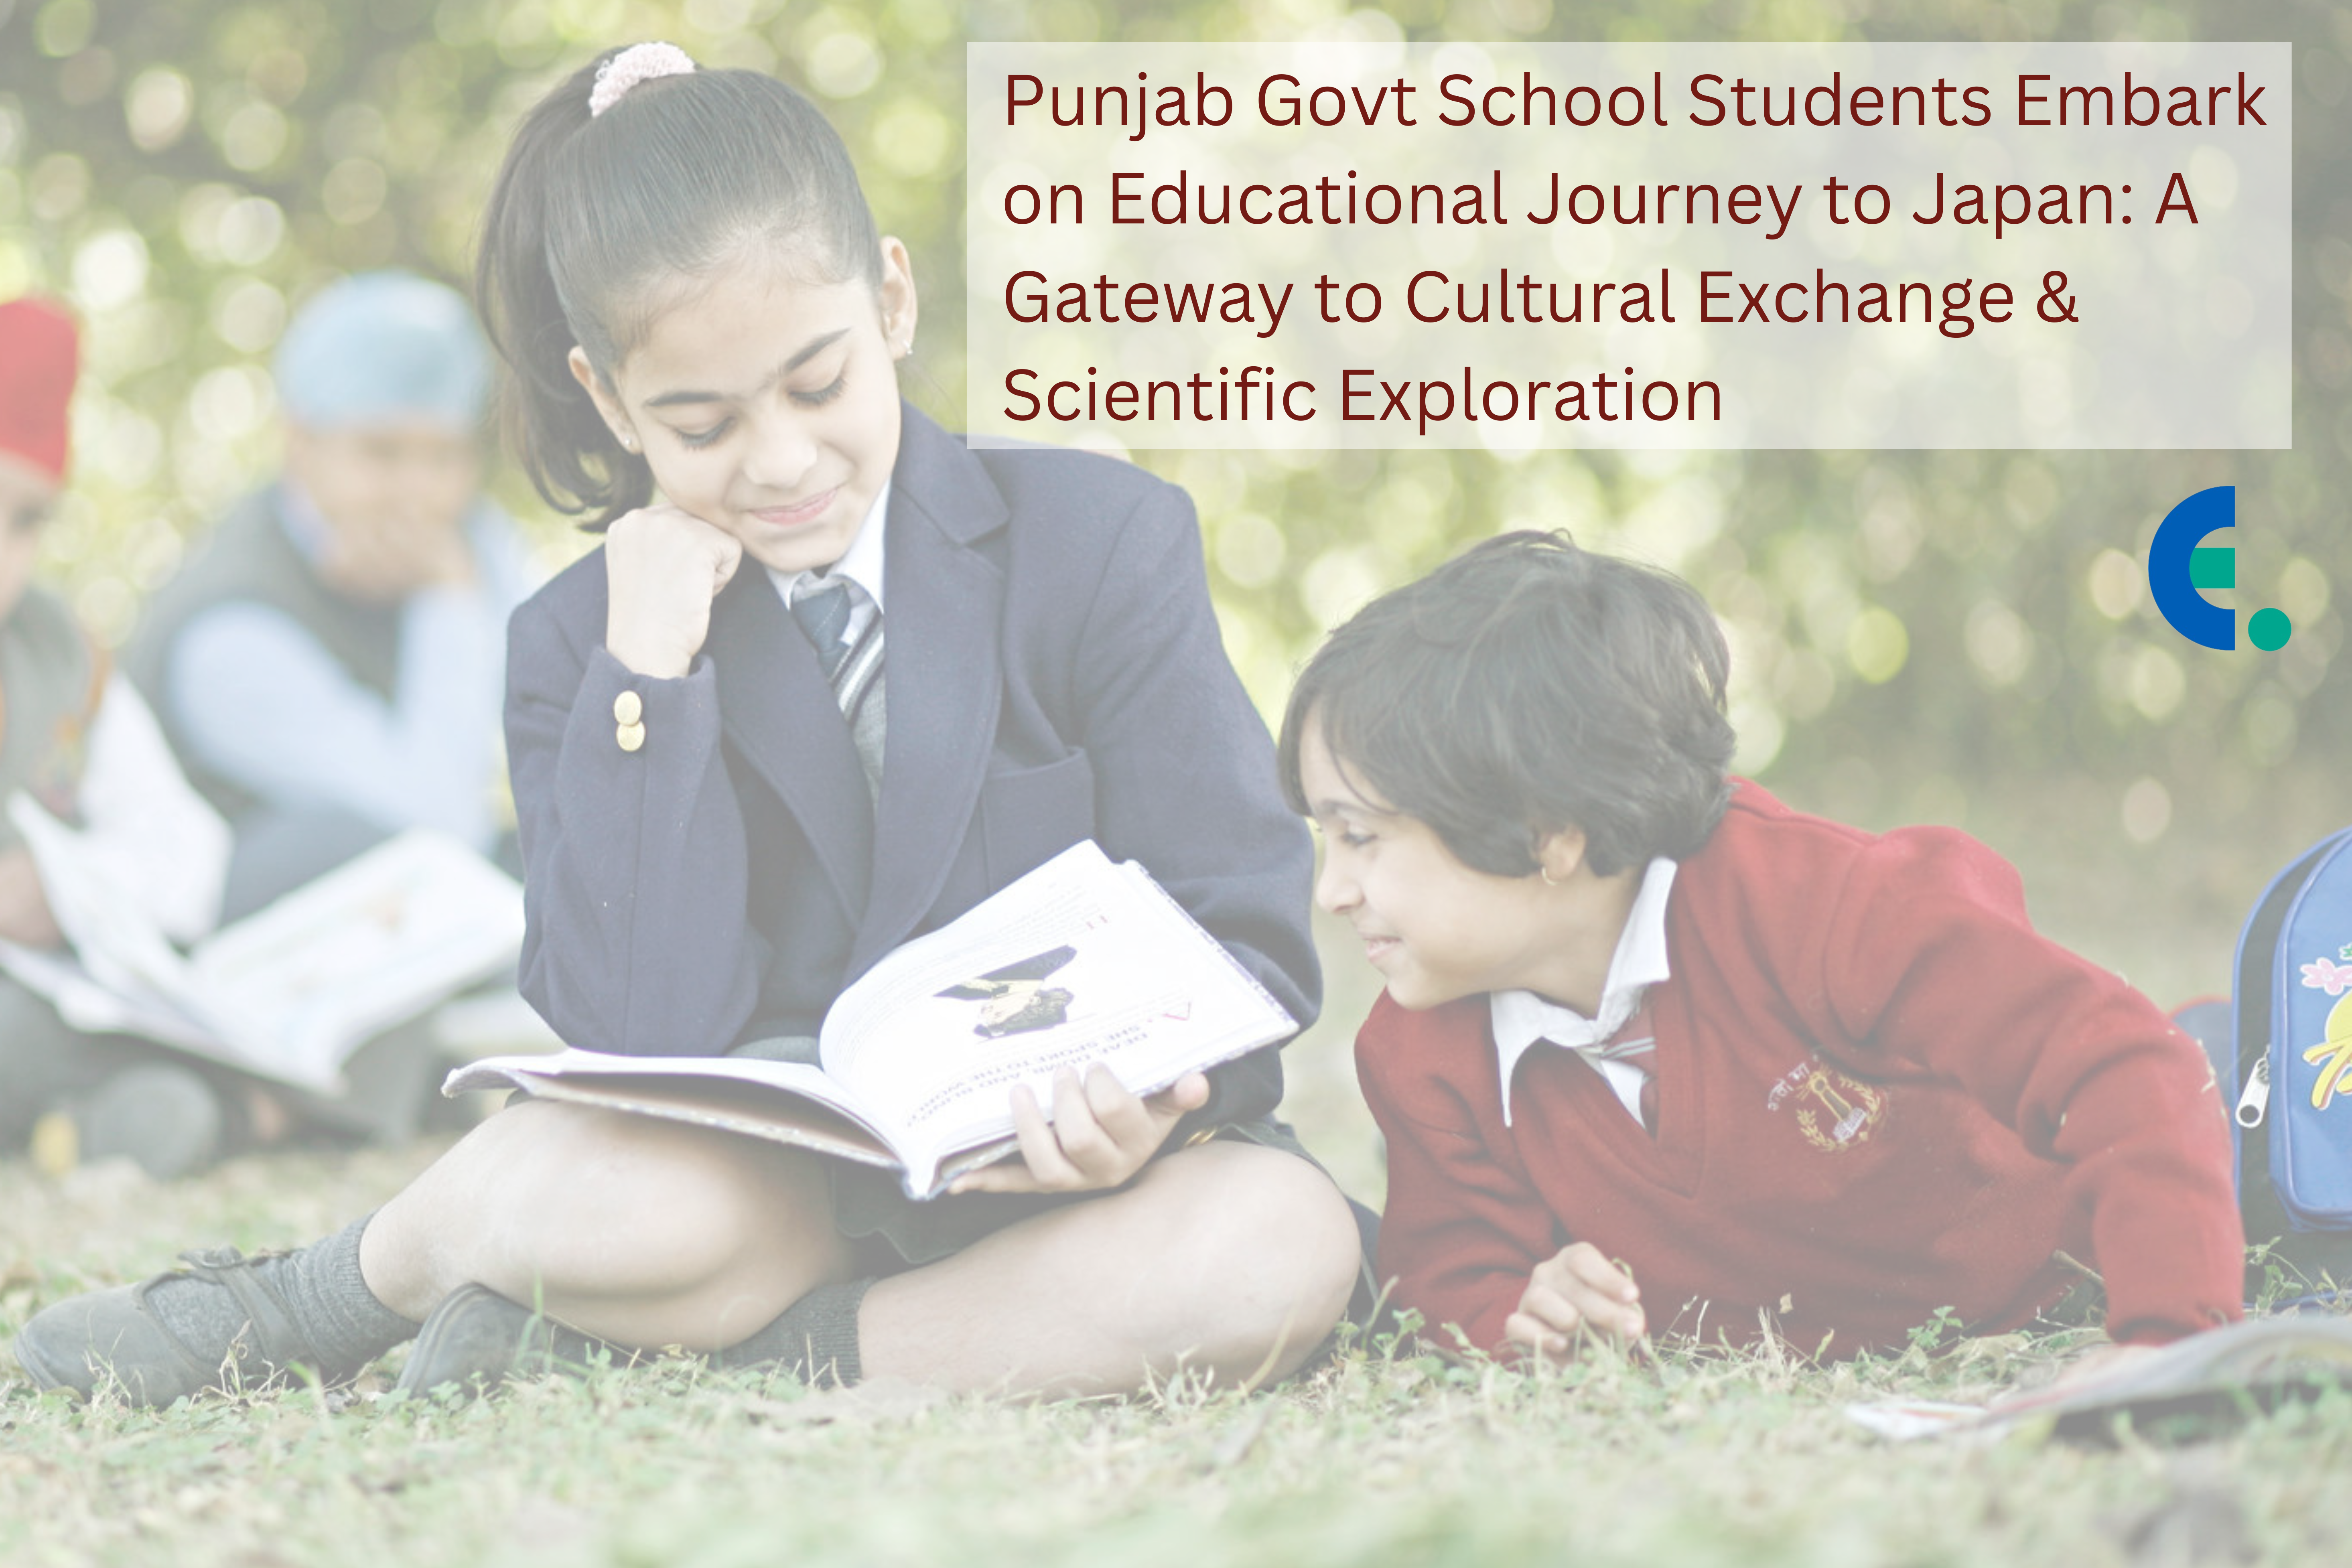 Punjab Government School Students Embark on Educational Journey to Japan: A Gateway to Cultural Exchange and Scientific Exploration